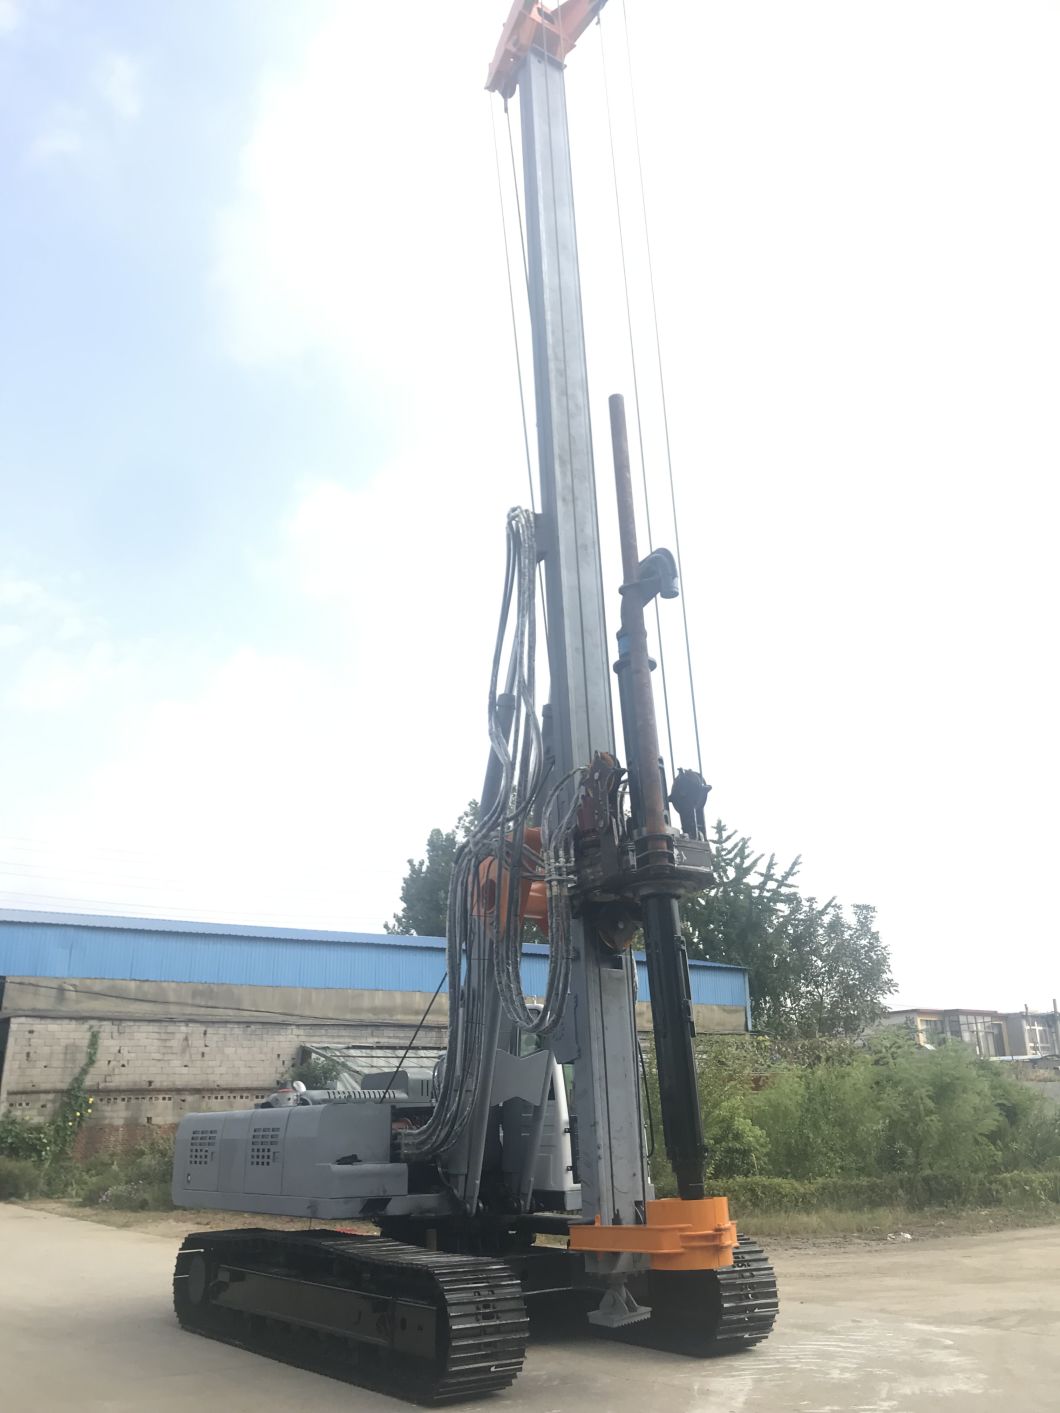 Auger Drilling Rig, Cfa Piling Rig Machine Dr-120m with Kelly Bar